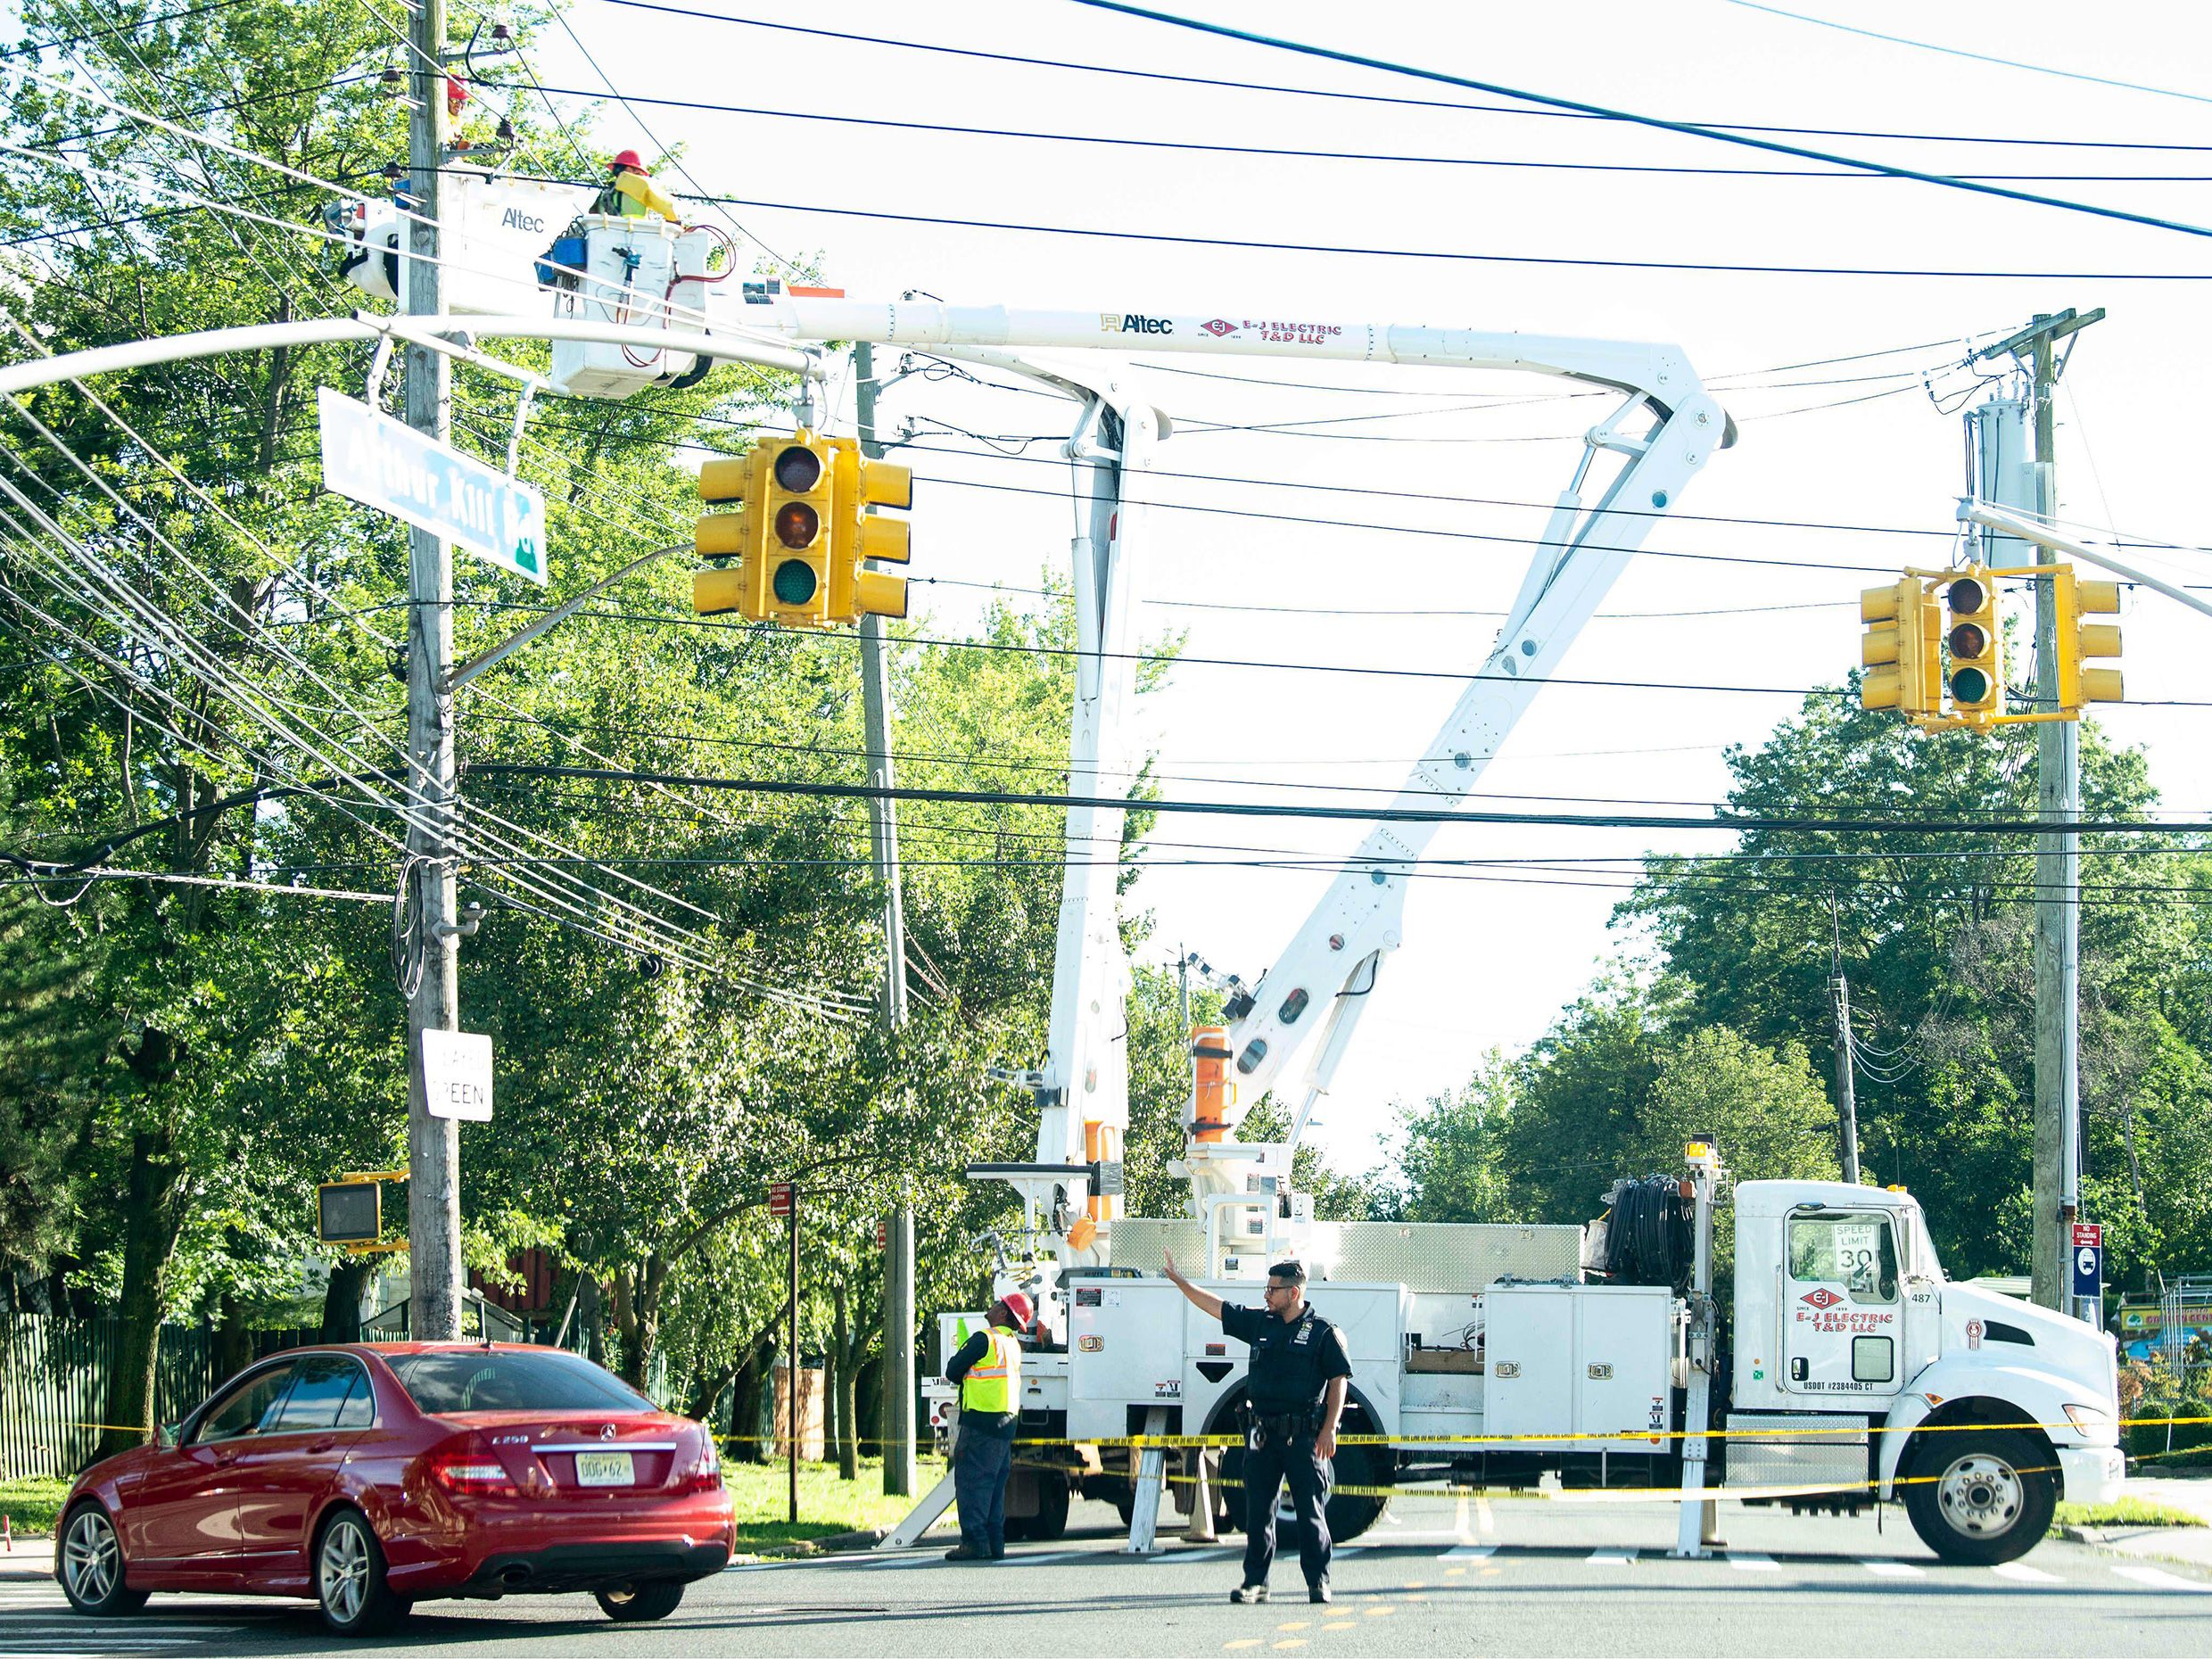 A police officer directs traffic as a Con Edison crew works to restore power due to Tropical Storm Isaias in Staten Island, New York.